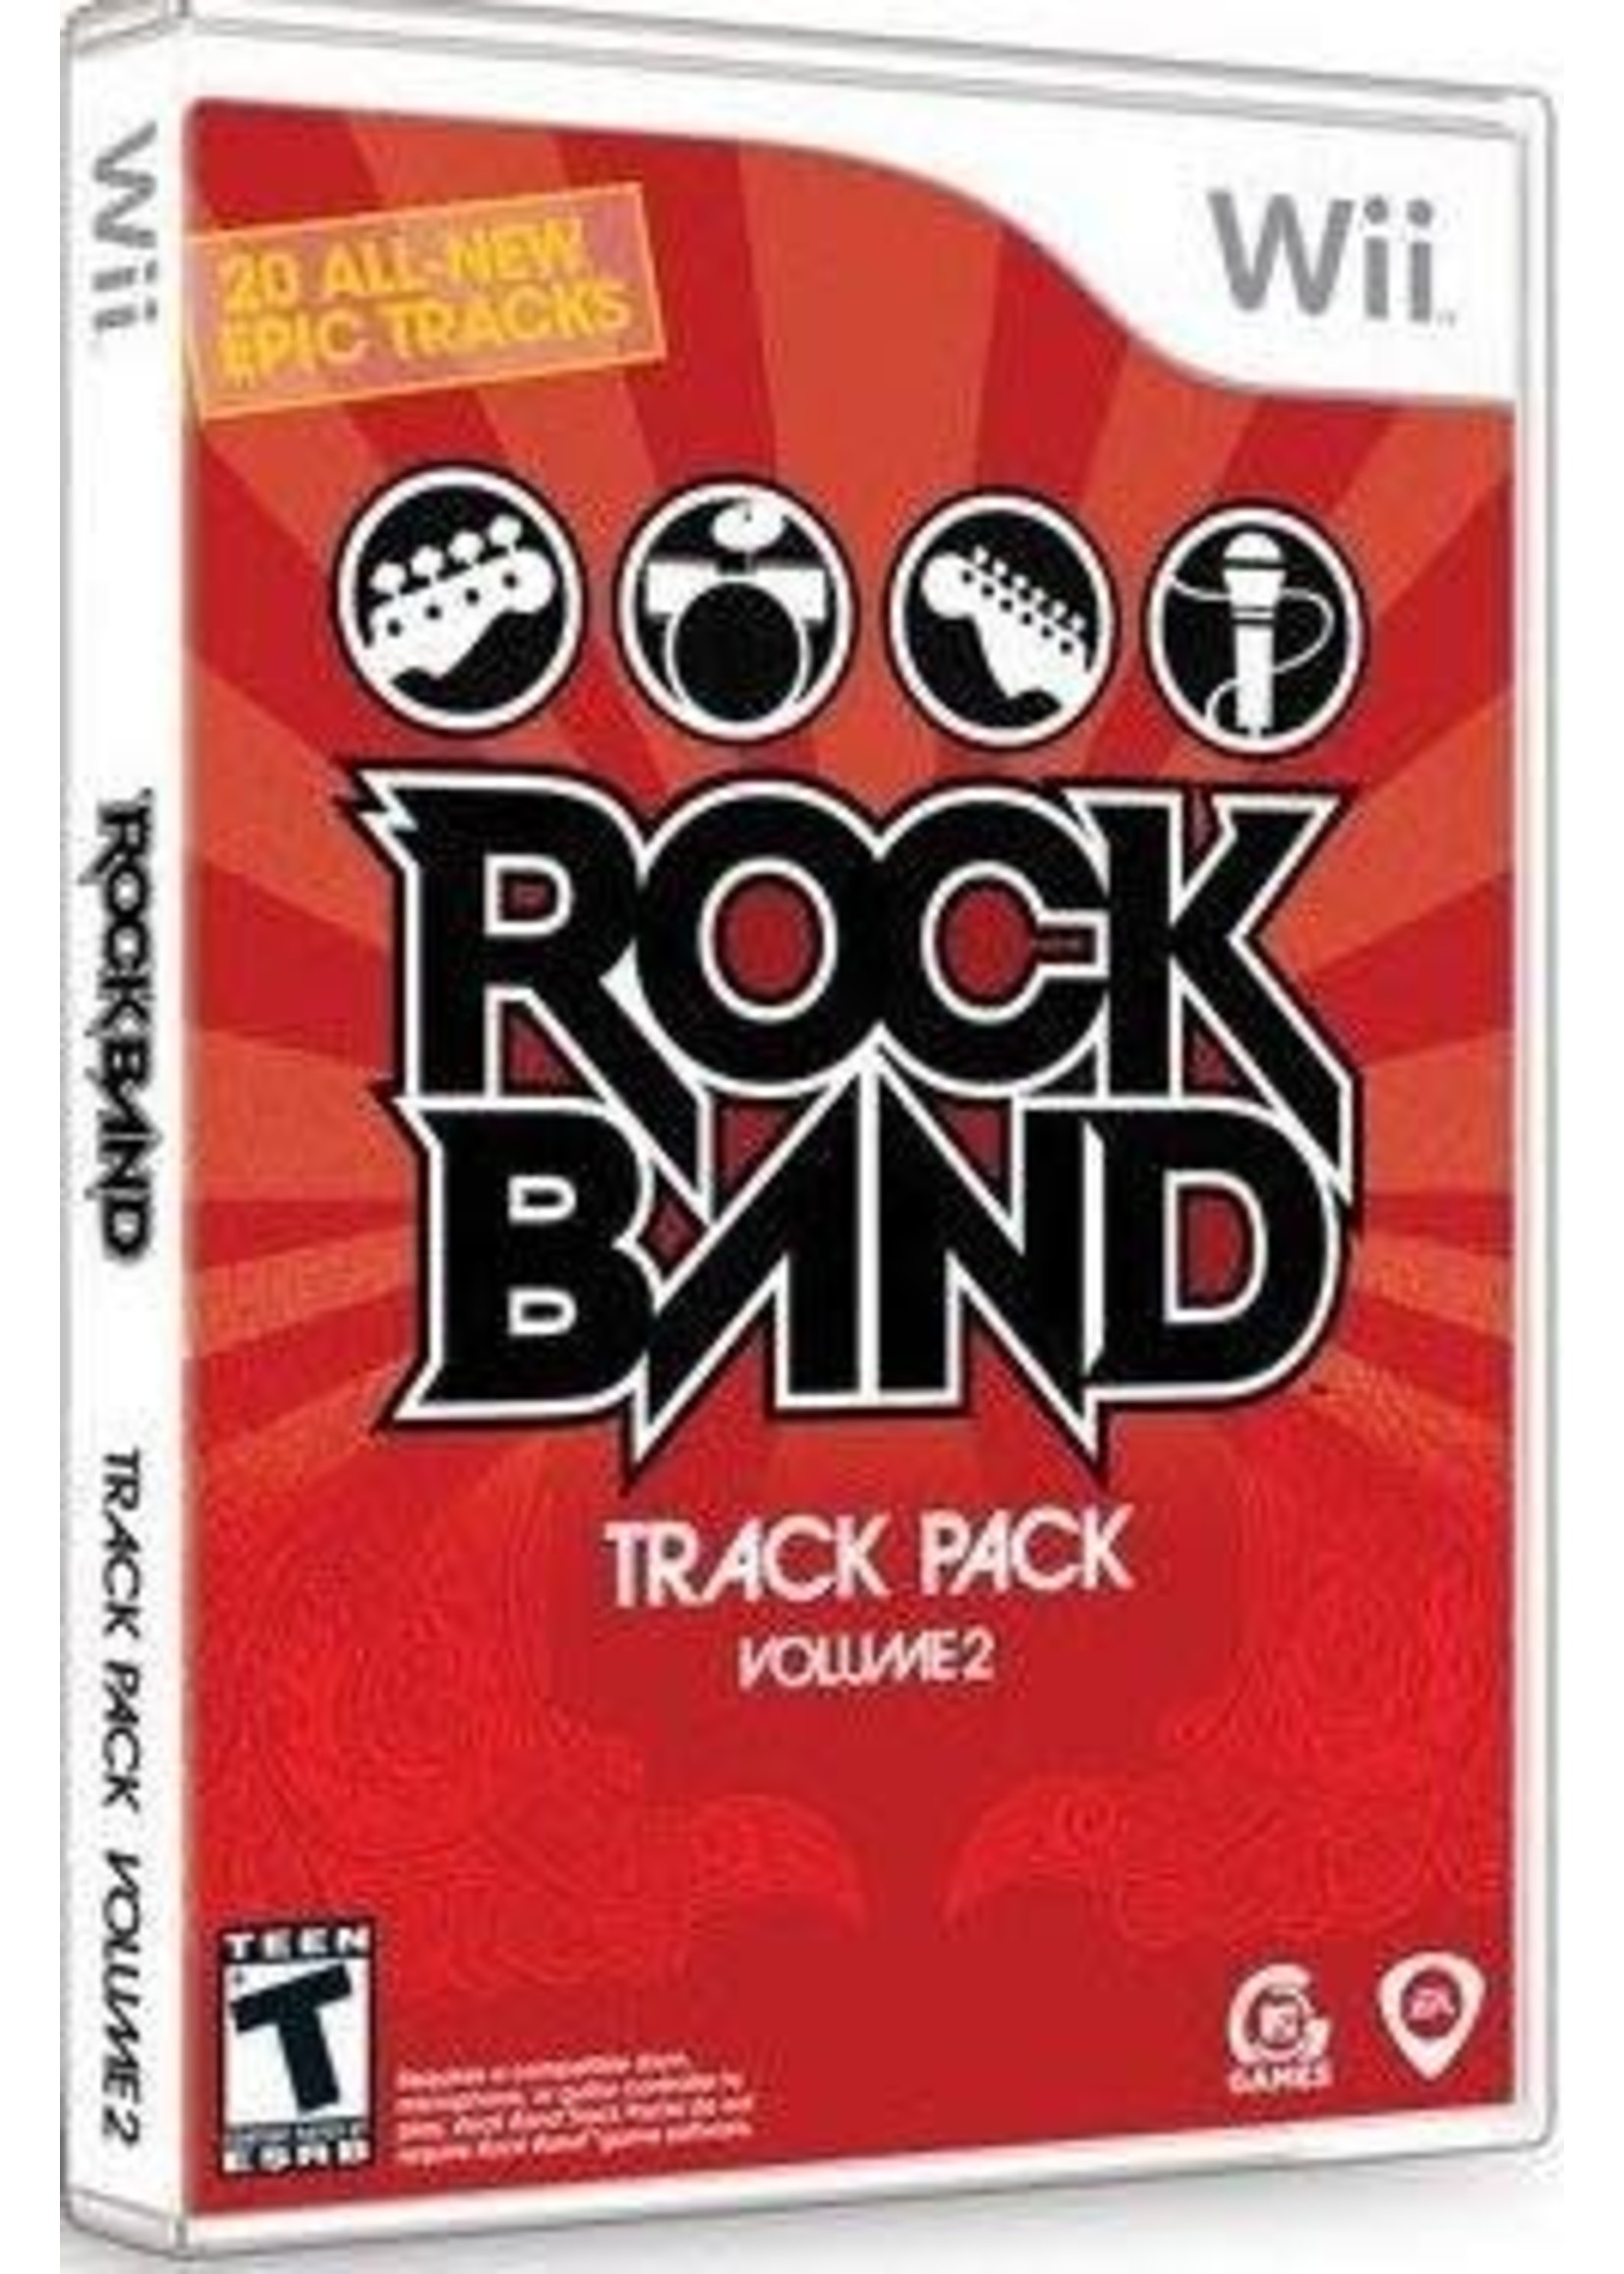 Rock Band Track Pack Vol 2 - WII NEW